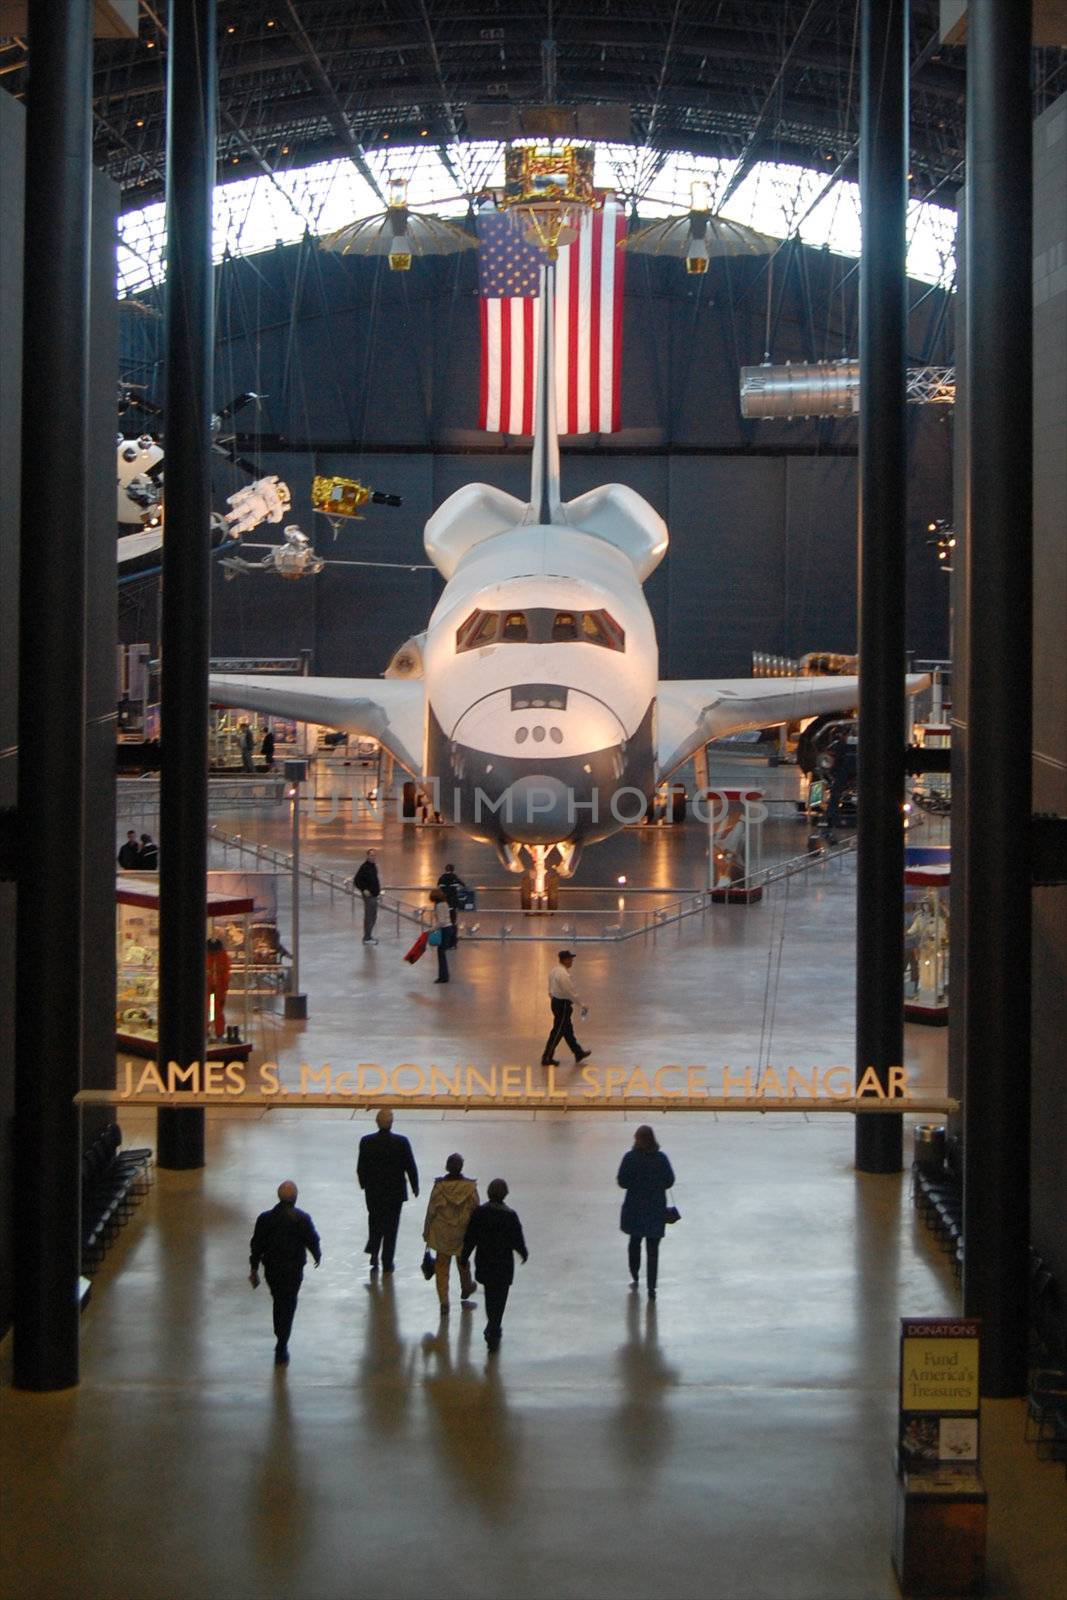 The space shuttle Enterprise was until 2012 displayed at the Smithsonian in the Washington area.